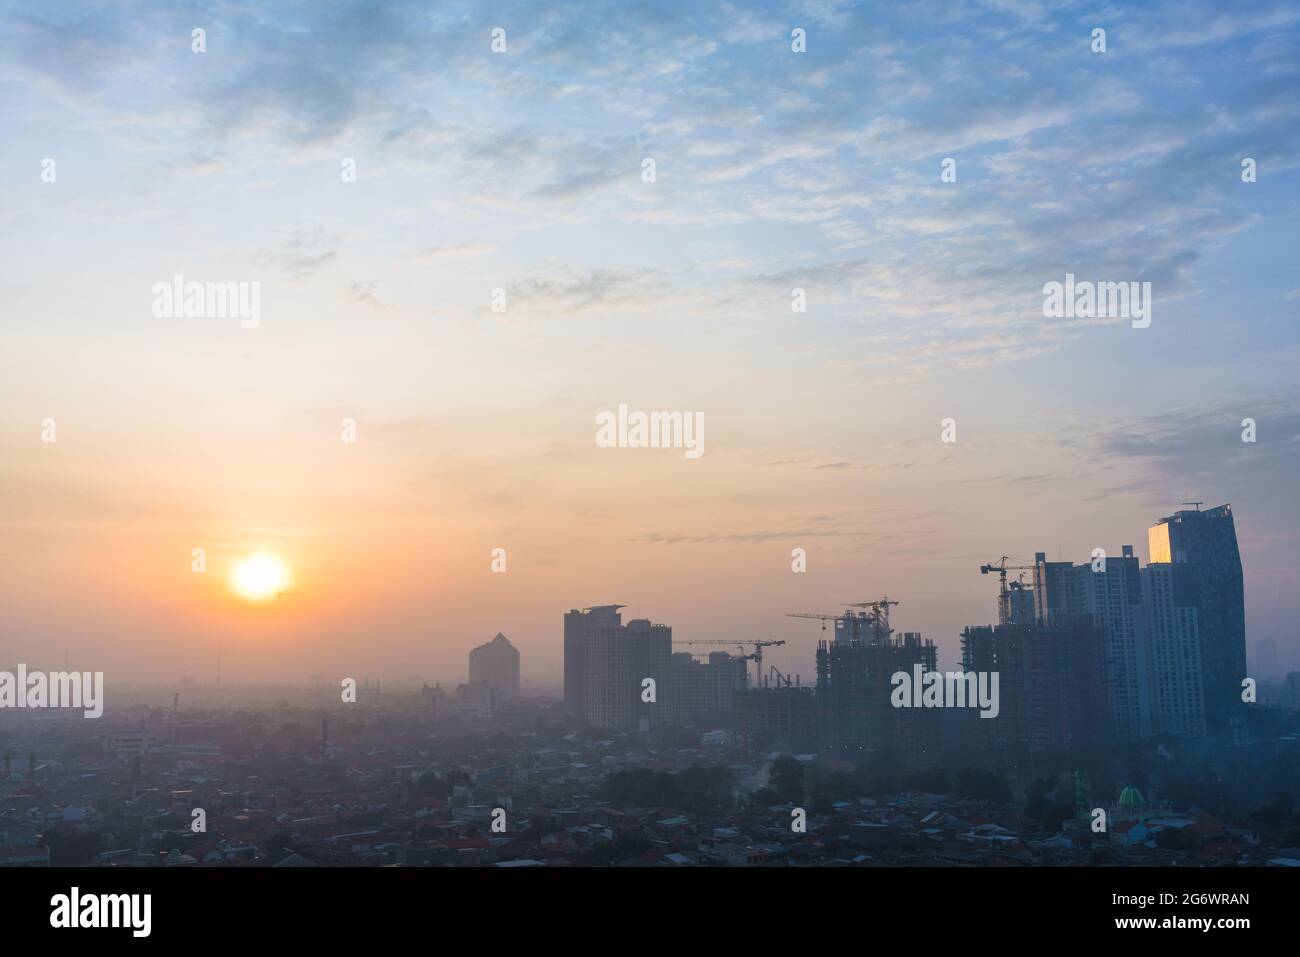 Panoramic view of Jakarta cityscape with skyscrapers and buildings under construction at sunrise Stock Photo